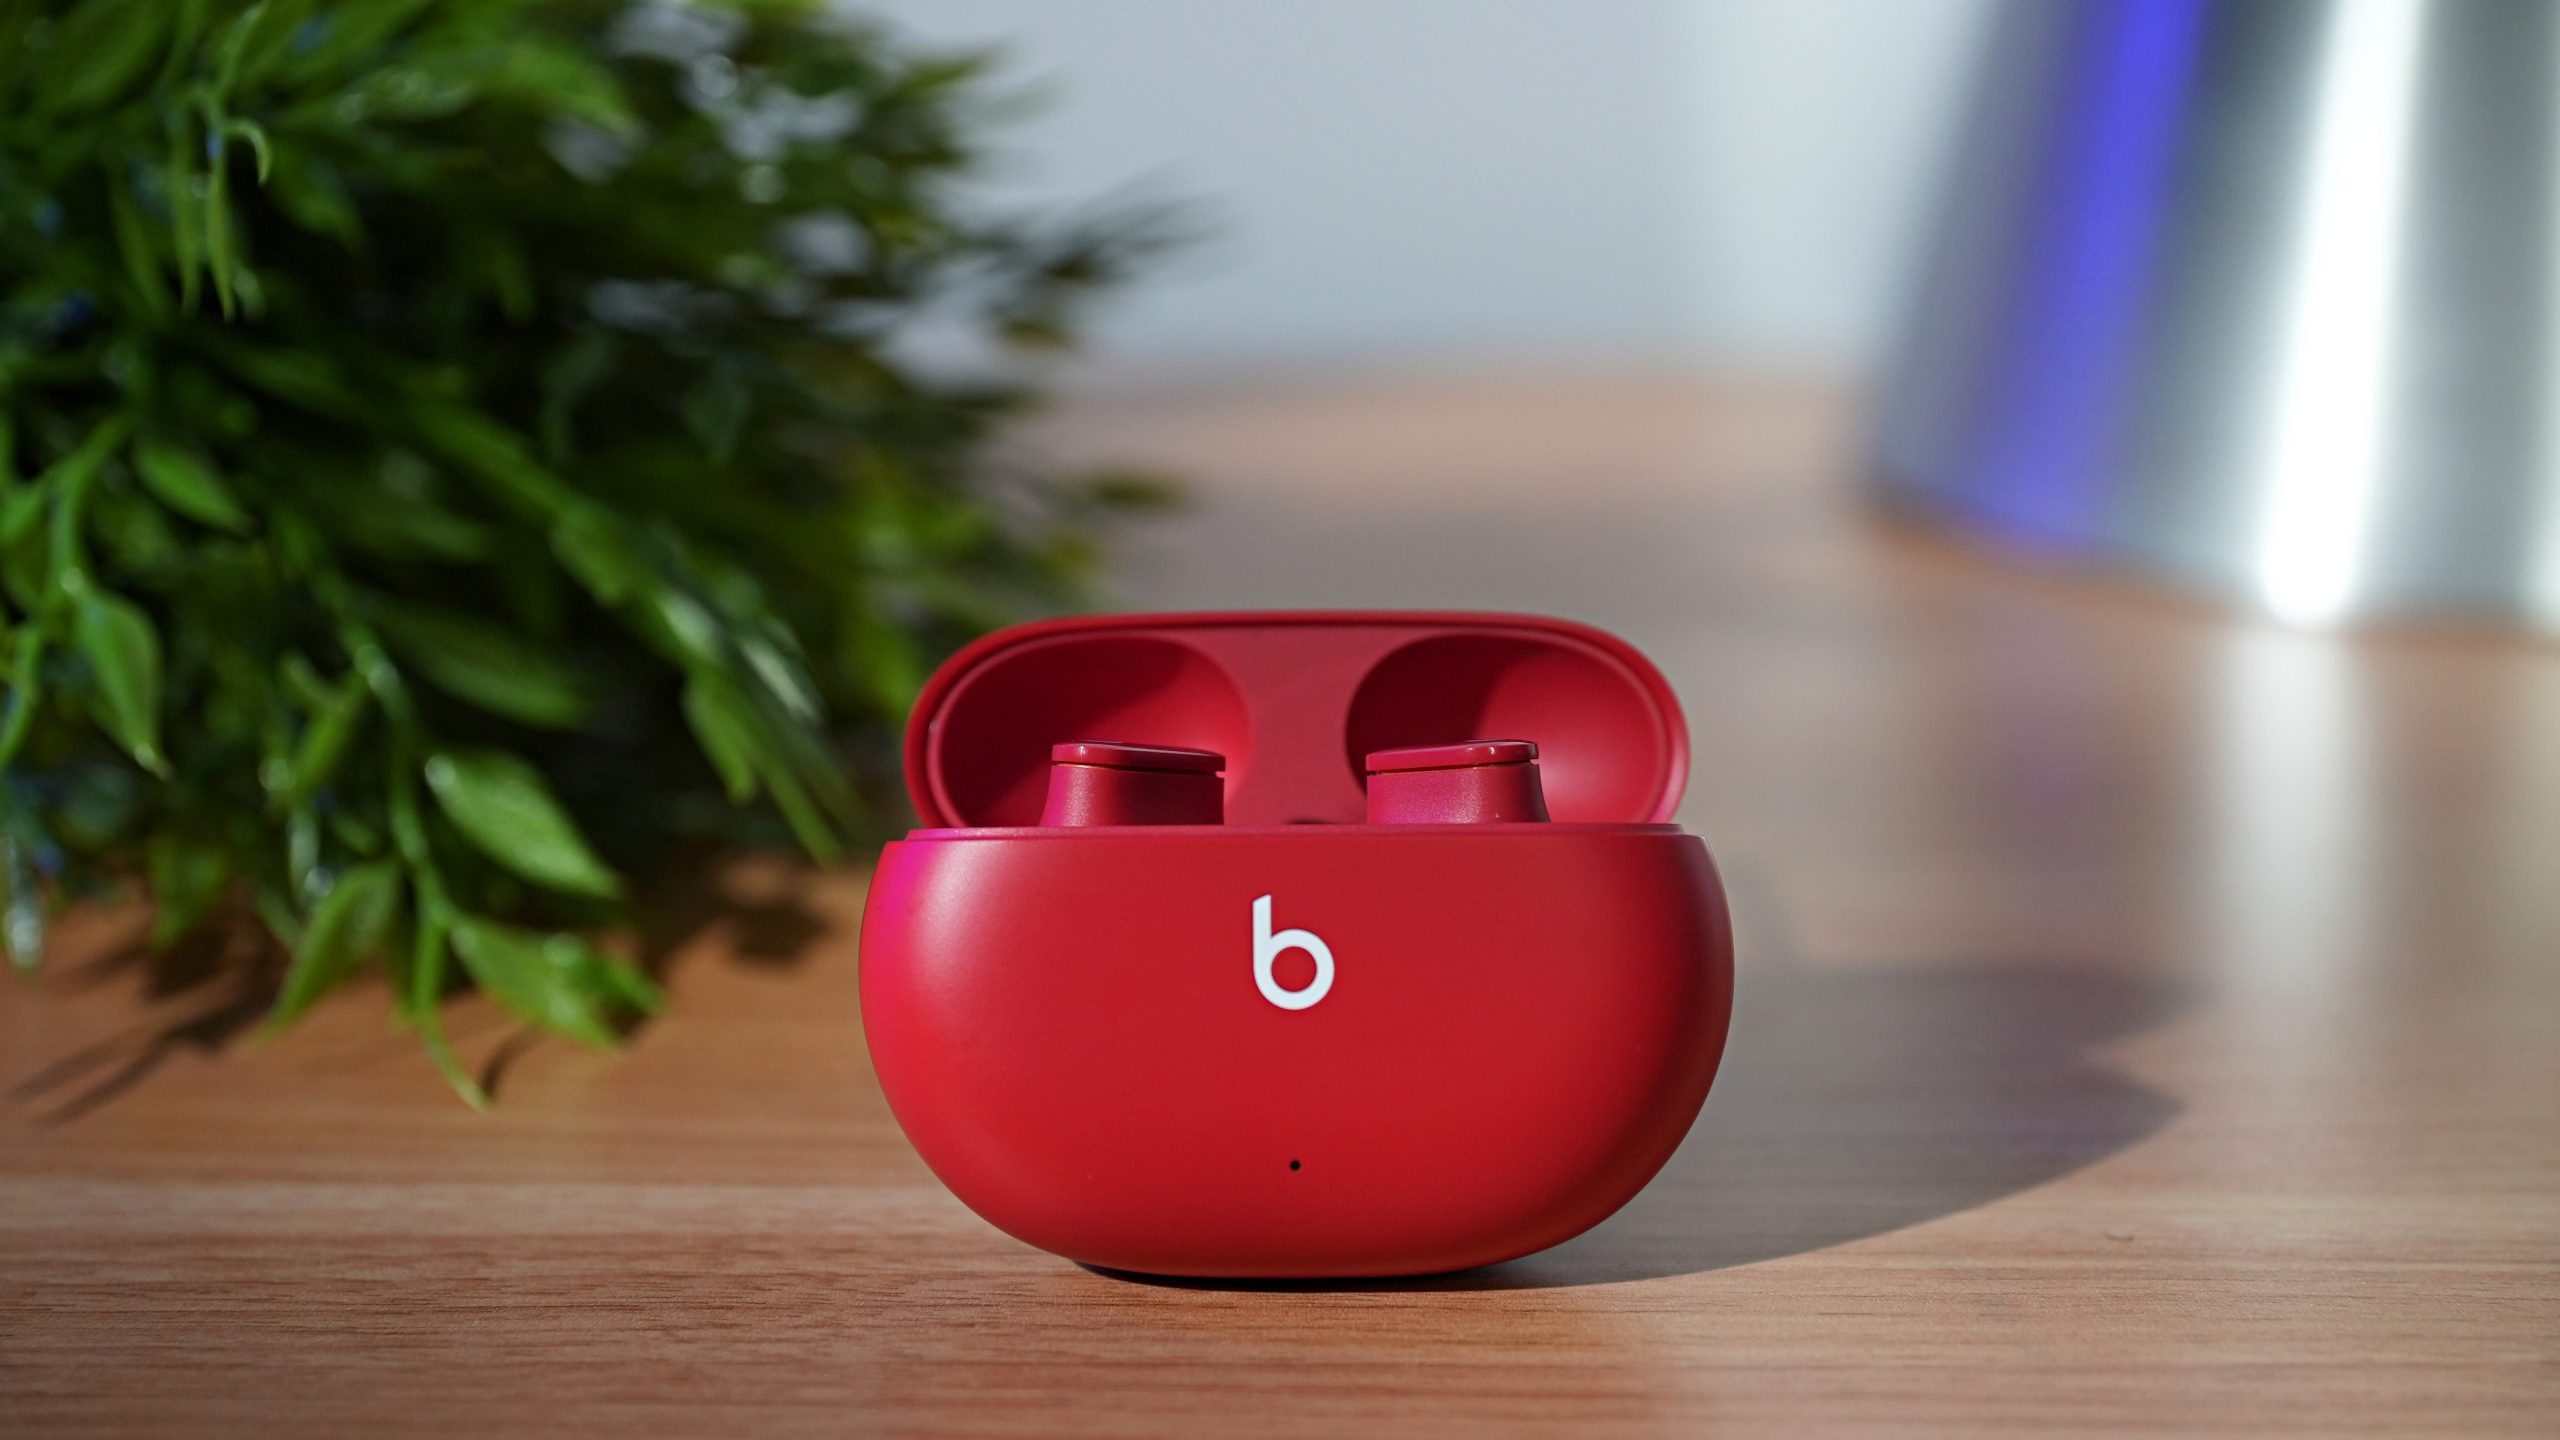 The Beats Studio Buds in an open case on a wood surface with plants in the background.